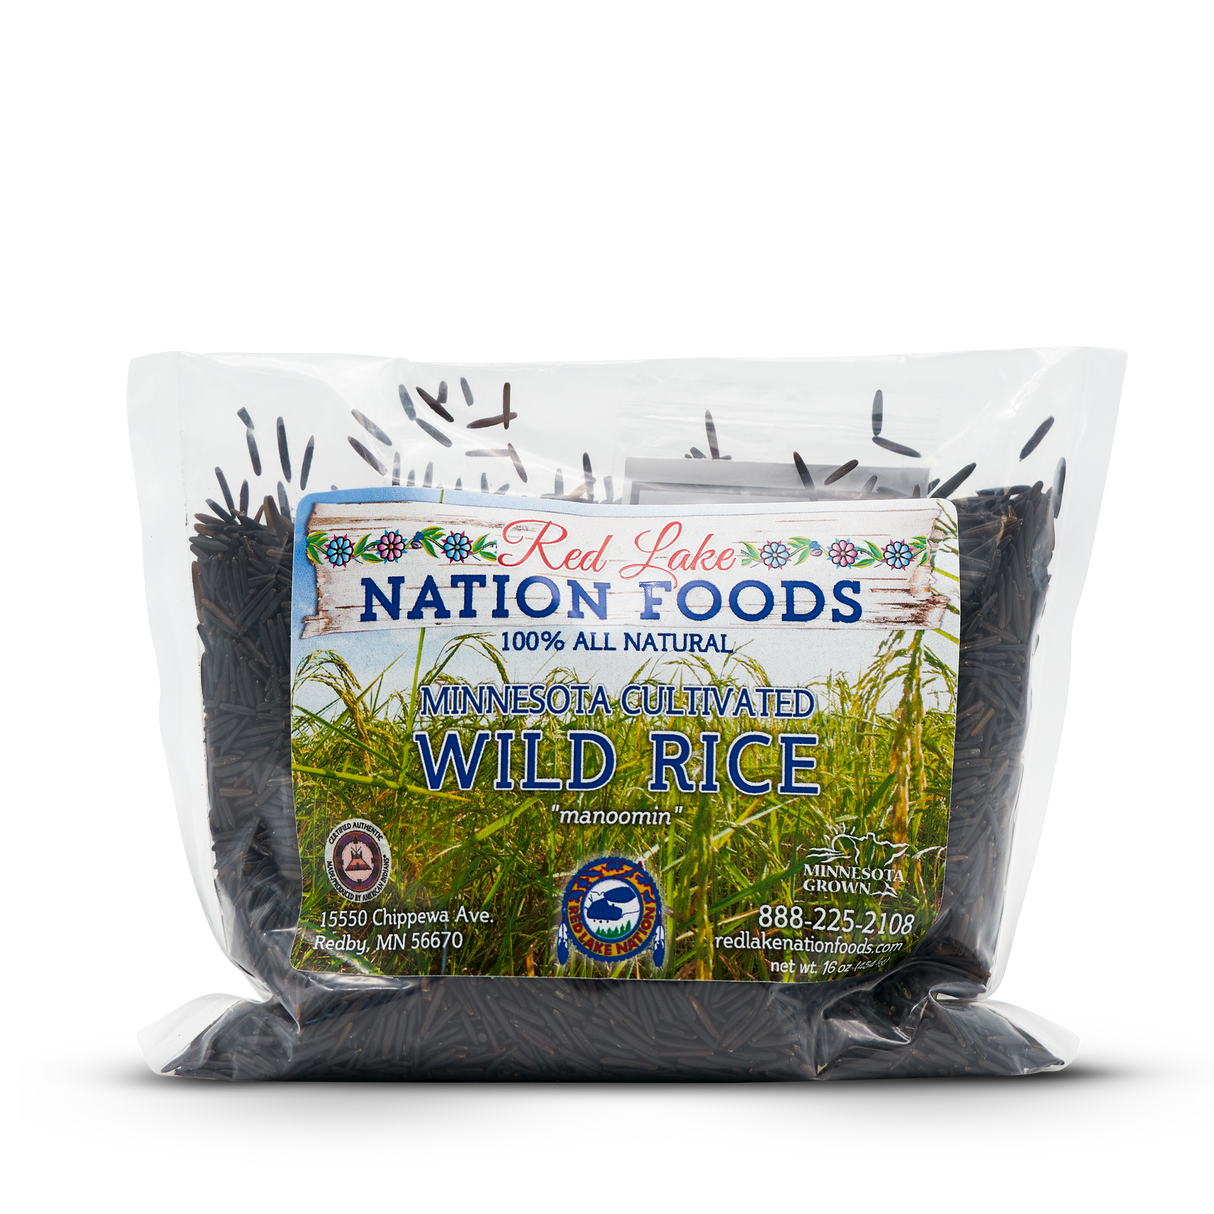 Red Lake Nation Foods Minnesota Cultivated Wild Rice (manoomin)